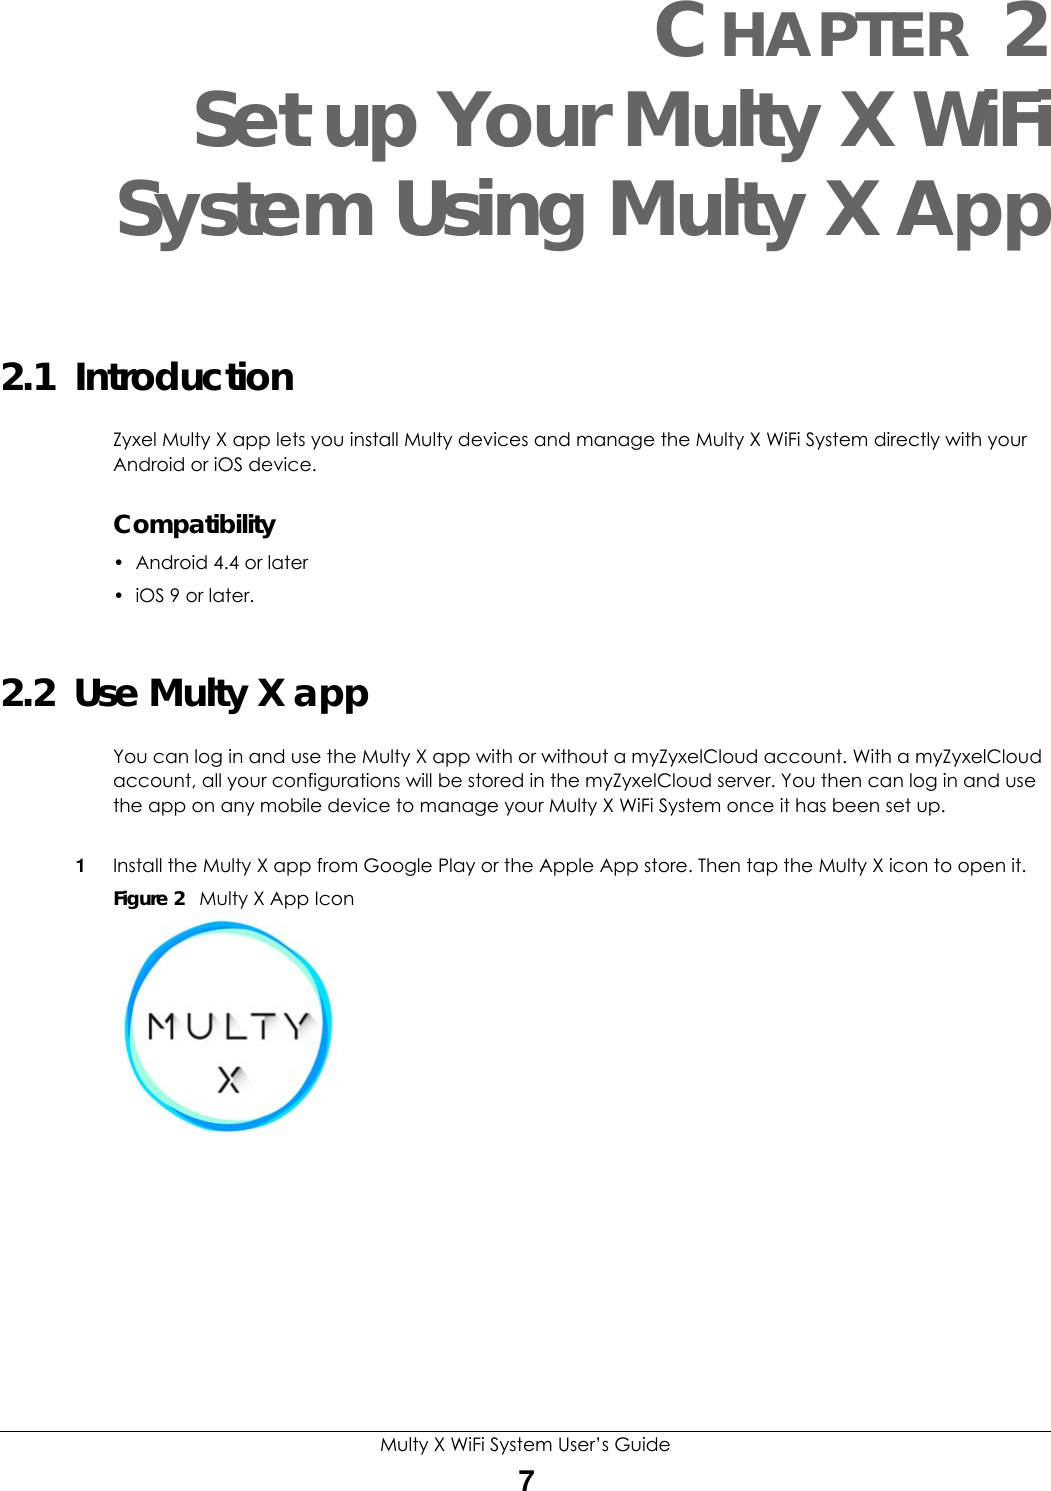 Multy X WiFi System User’s Guide7CHAPTER 2Set up Your Multy X WiFiSystem Using Multy X App2.1  IntroductionZyxel Multy X app lets you install Multy devices and manage the Multy X WiFi System directly with your Android or iOS device.Compatibility• Android 4.4 or later •iOS 9 or later.2.2  Use Multy X appYou can log in and use the Multy X app with or without a myZyxelCloud account. With a myZyxelCloud account, all your configurations will be stored in the myZyxelCloud server. You then can log in and use the app on any mobile device to manage your Multy X WiFi System once it has been set up.1Install the Multy X app from Google Play or the Apple App store. Then tap the Multy X icon to open it. Figure 2   Multy X App Icon